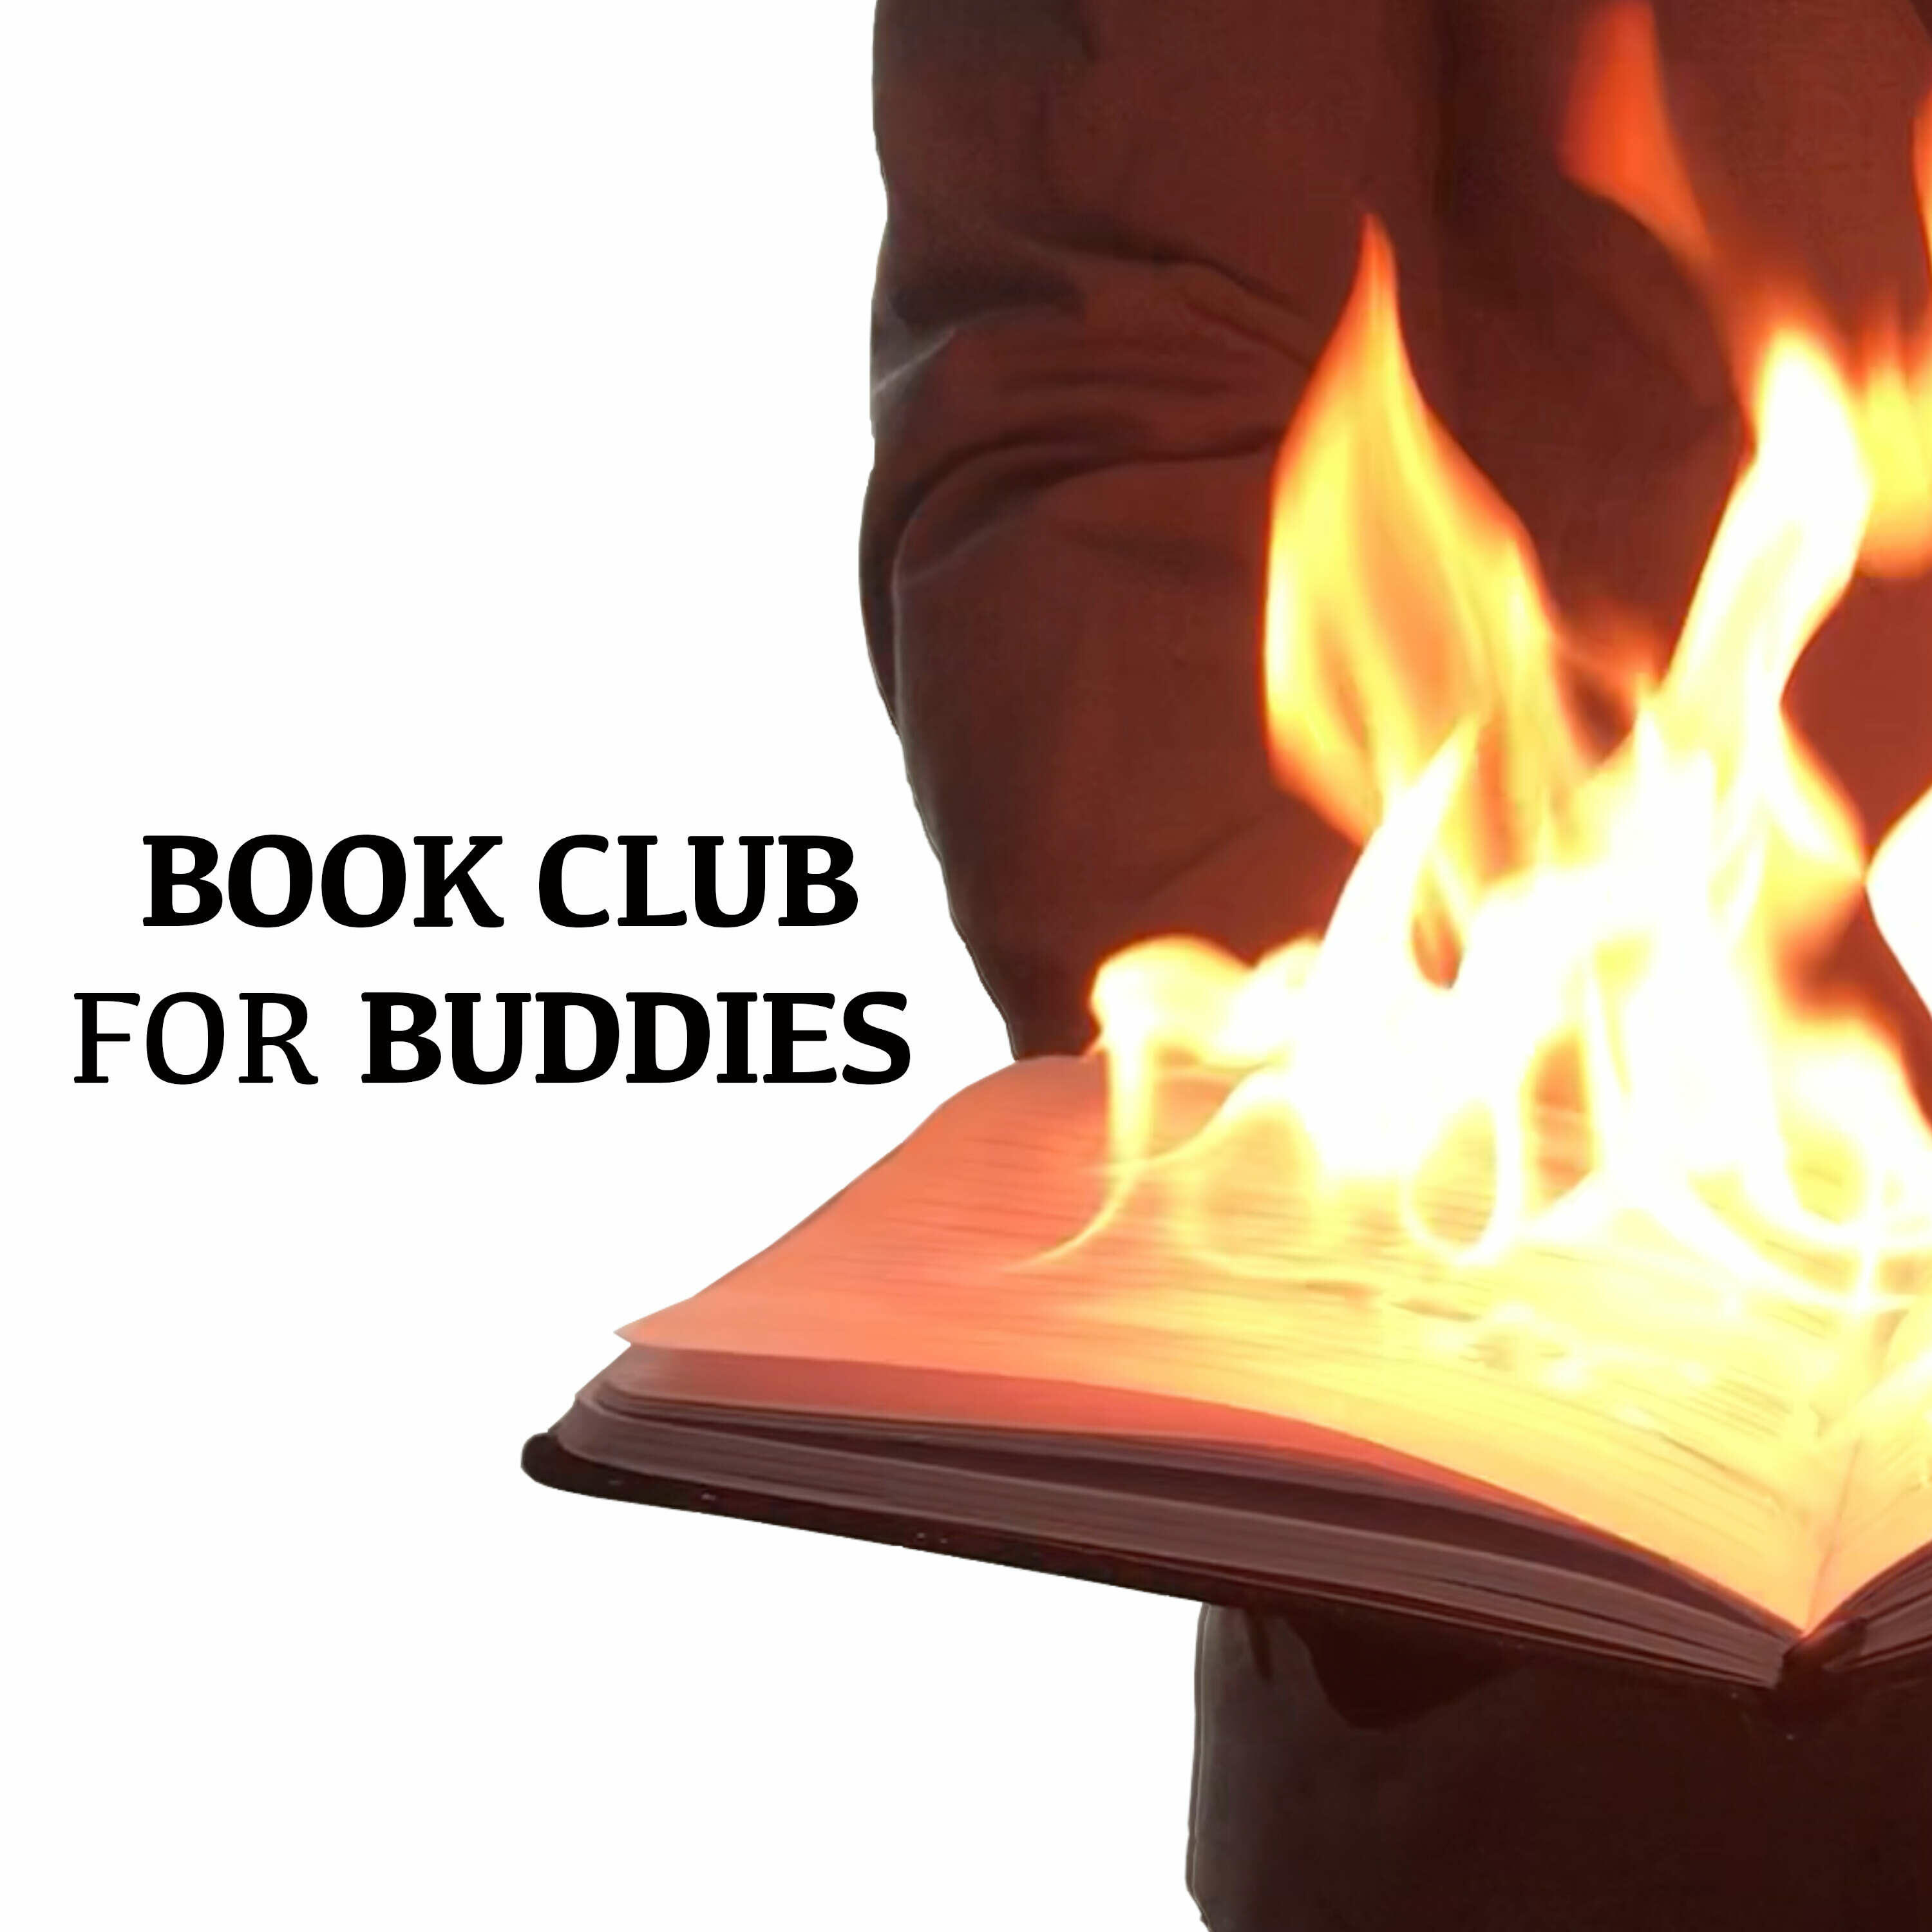 029 Chapter 13 Dax Flame Book Club For Buddies Iheartradio